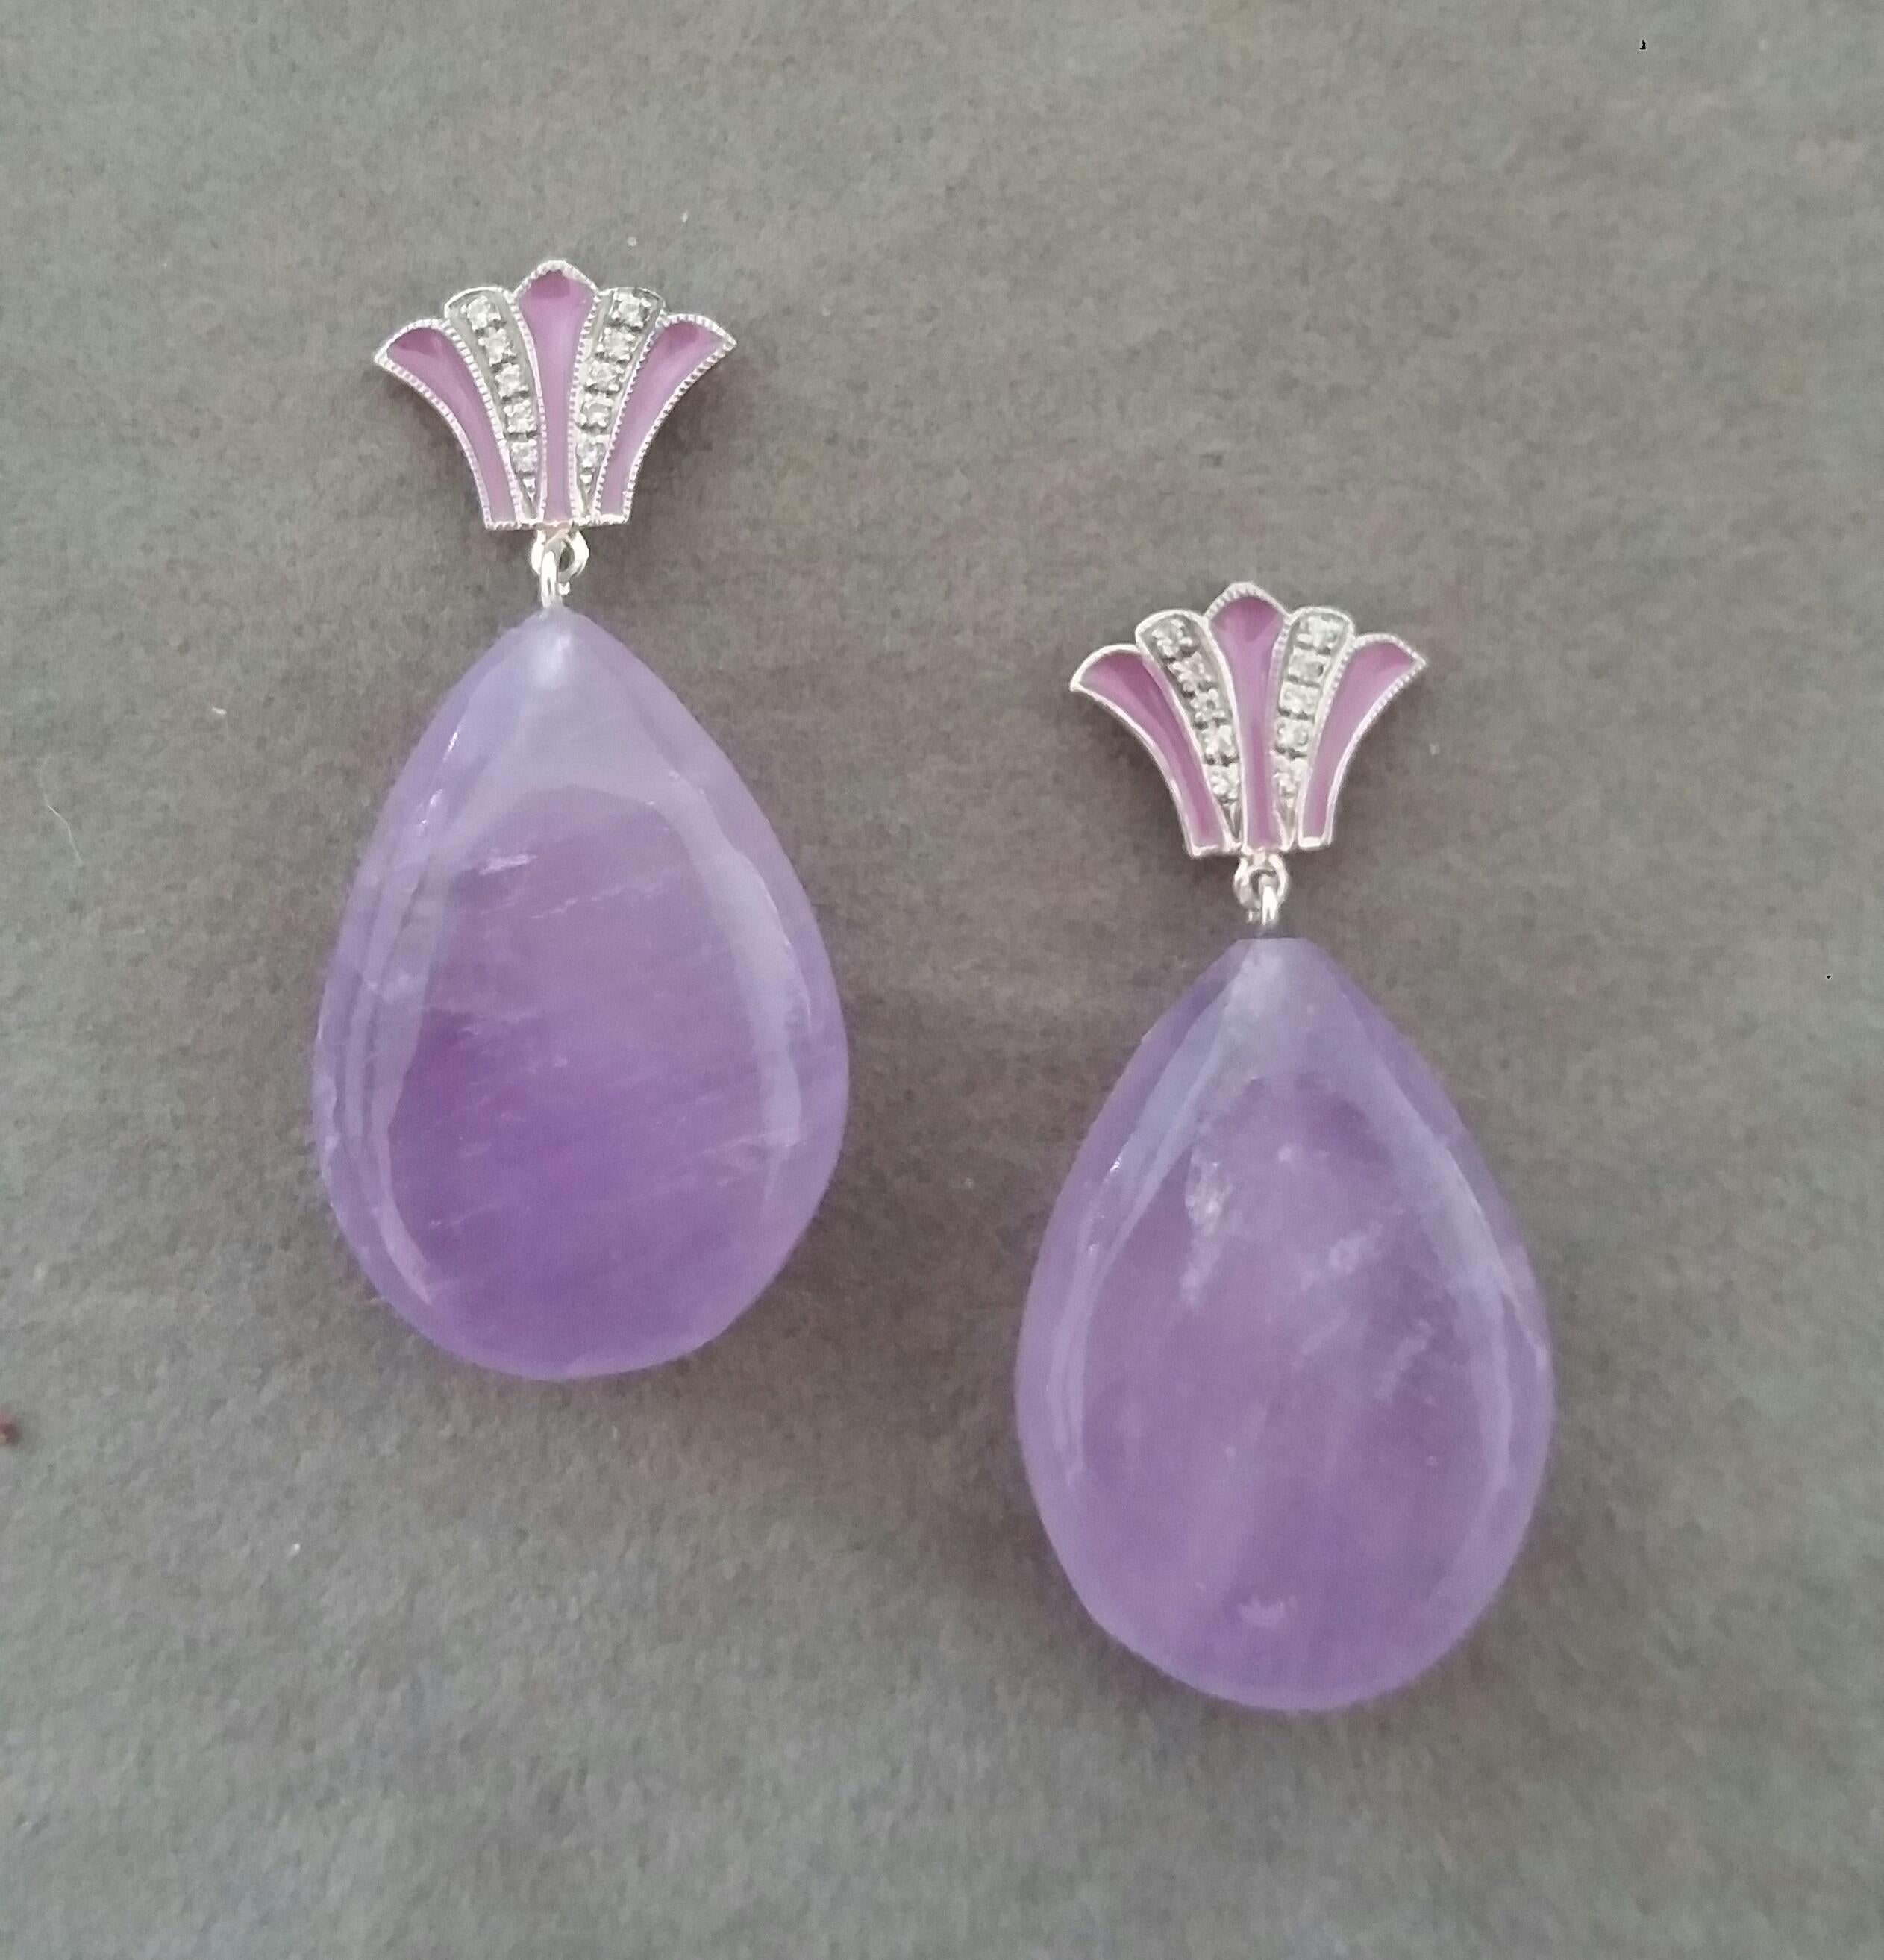 Unique pair of Amethyst Drops earrings with on top 2 white gold elements  in a Crown shape with 20 full cut round Diamonds and Lavender Enamel. In the bottom parts we have 2 Amethyst Plain Drops measuring 18x 26 mm.

In 1978 our workshop started in